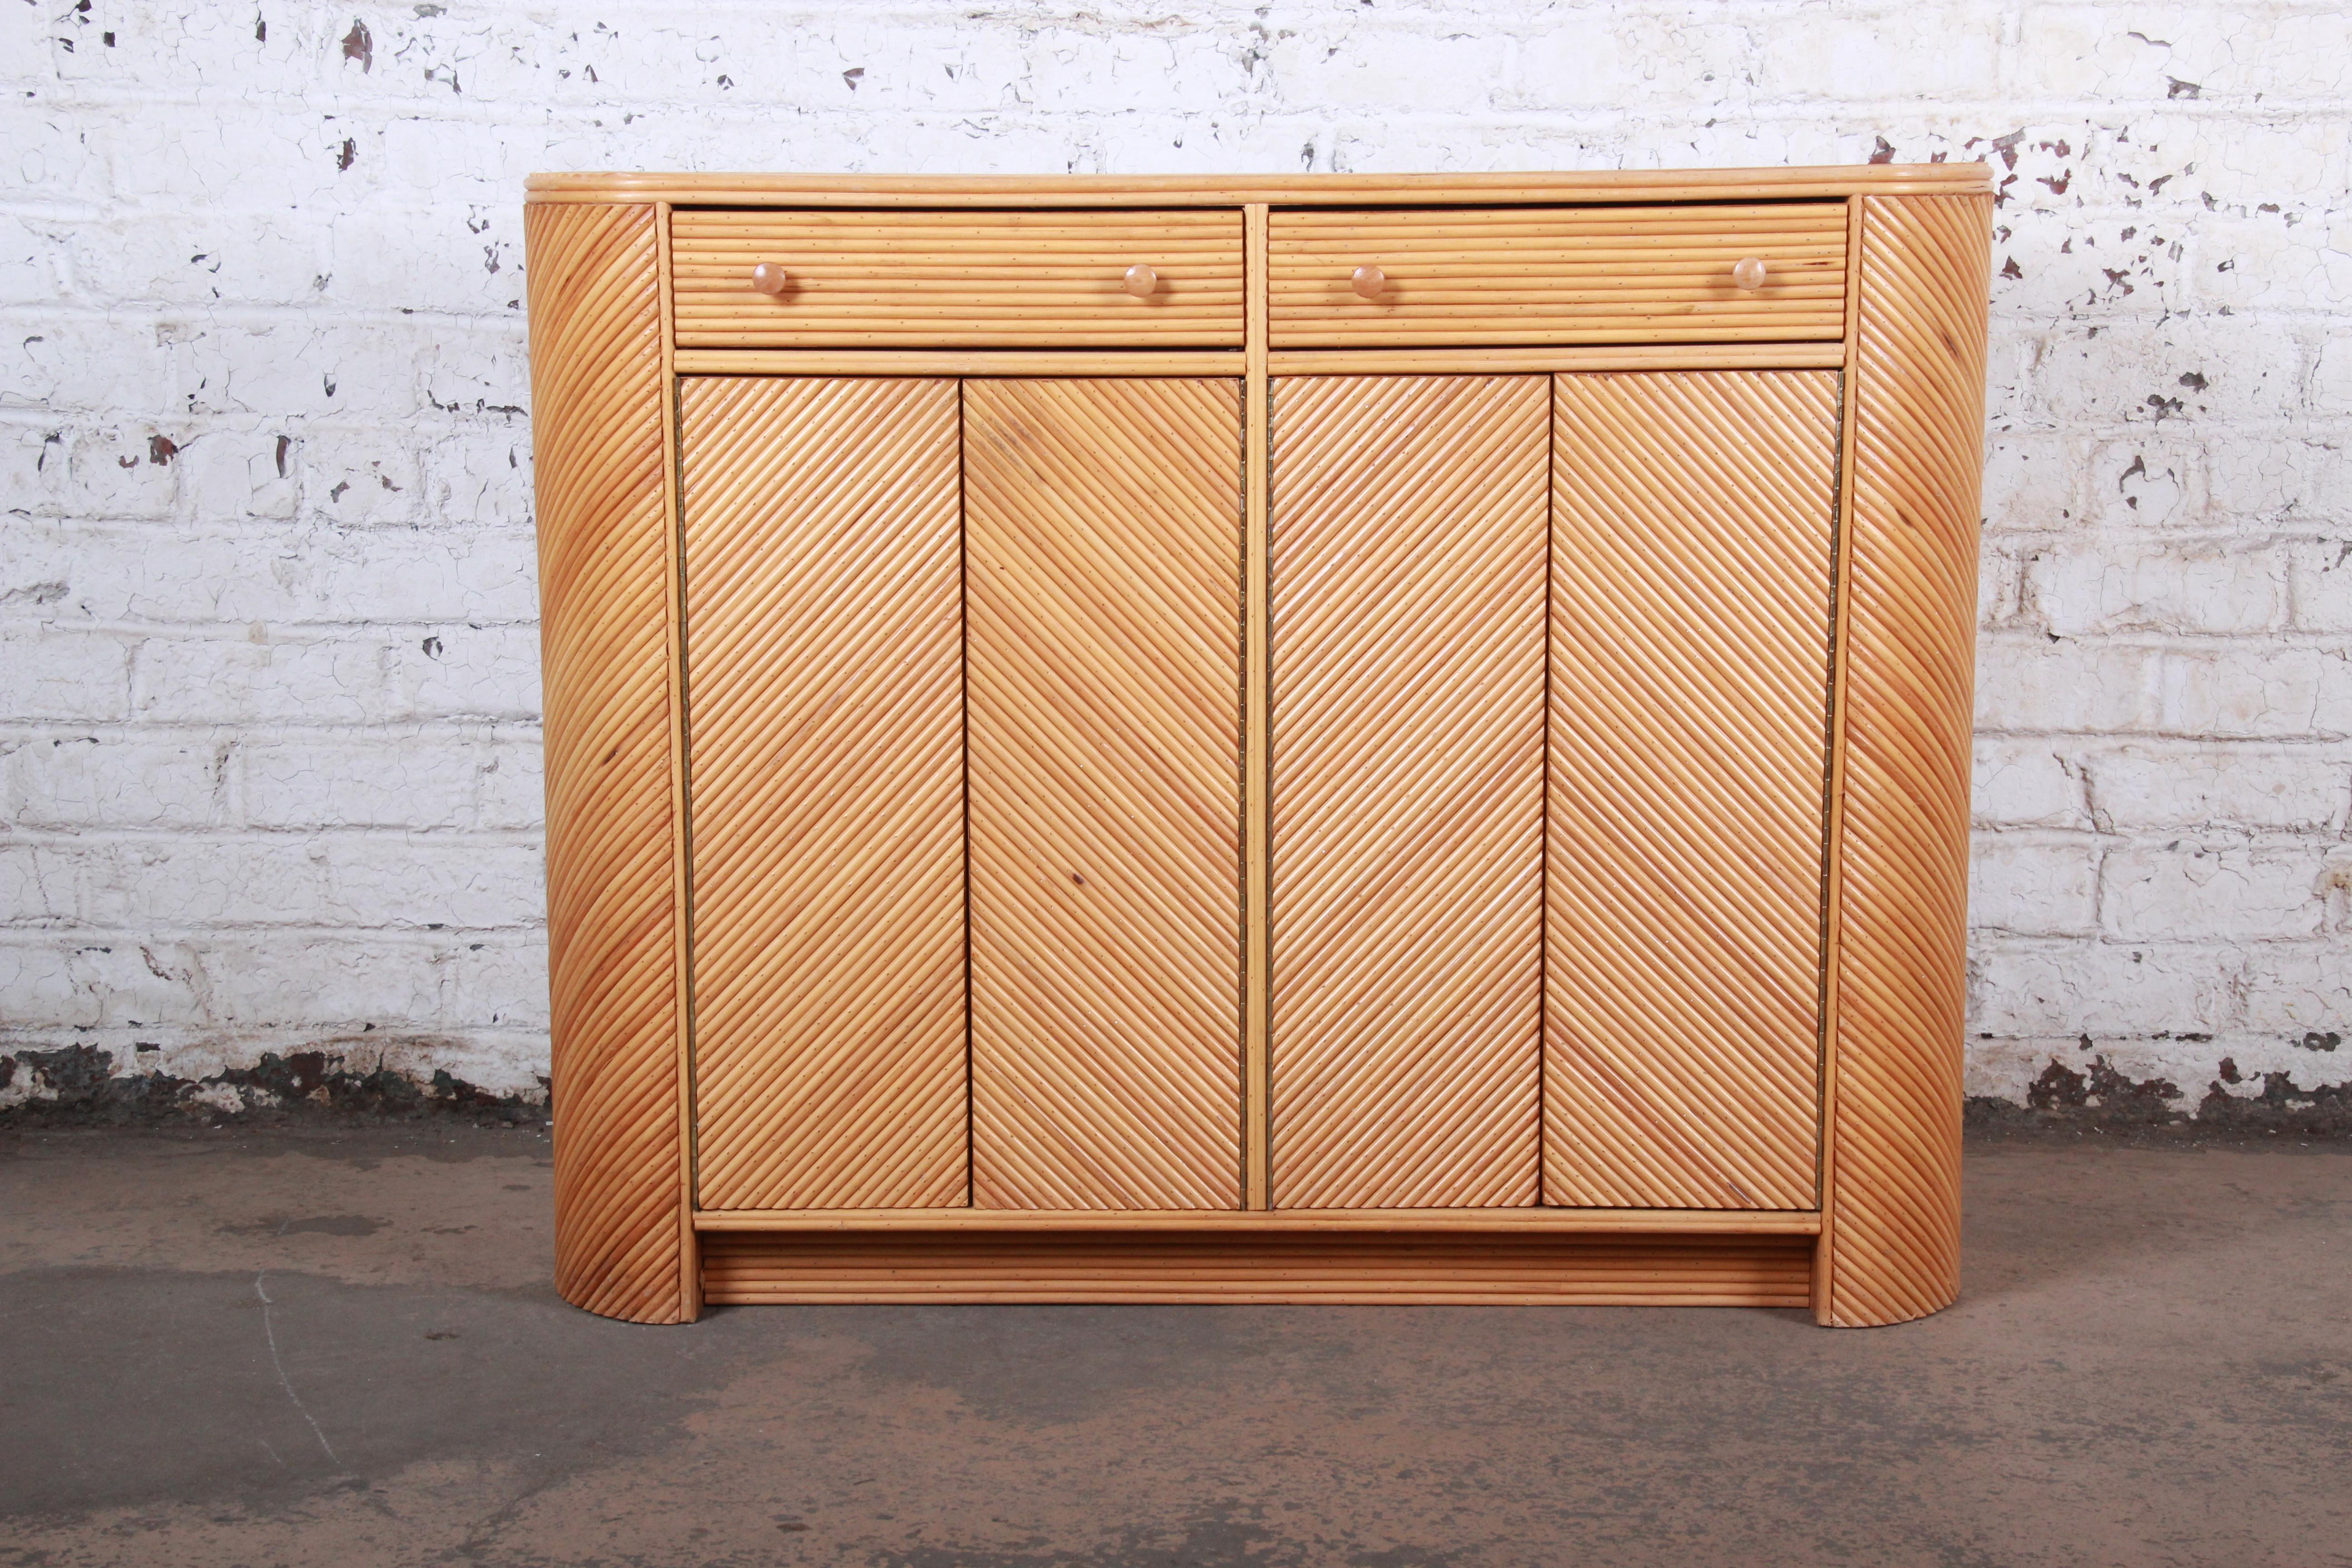 An exceptional midcentury Hollywood Regency split reed rattan compact sideboard cabinet

USA, circa 1970s

Split reed and rattan

Measures: 46